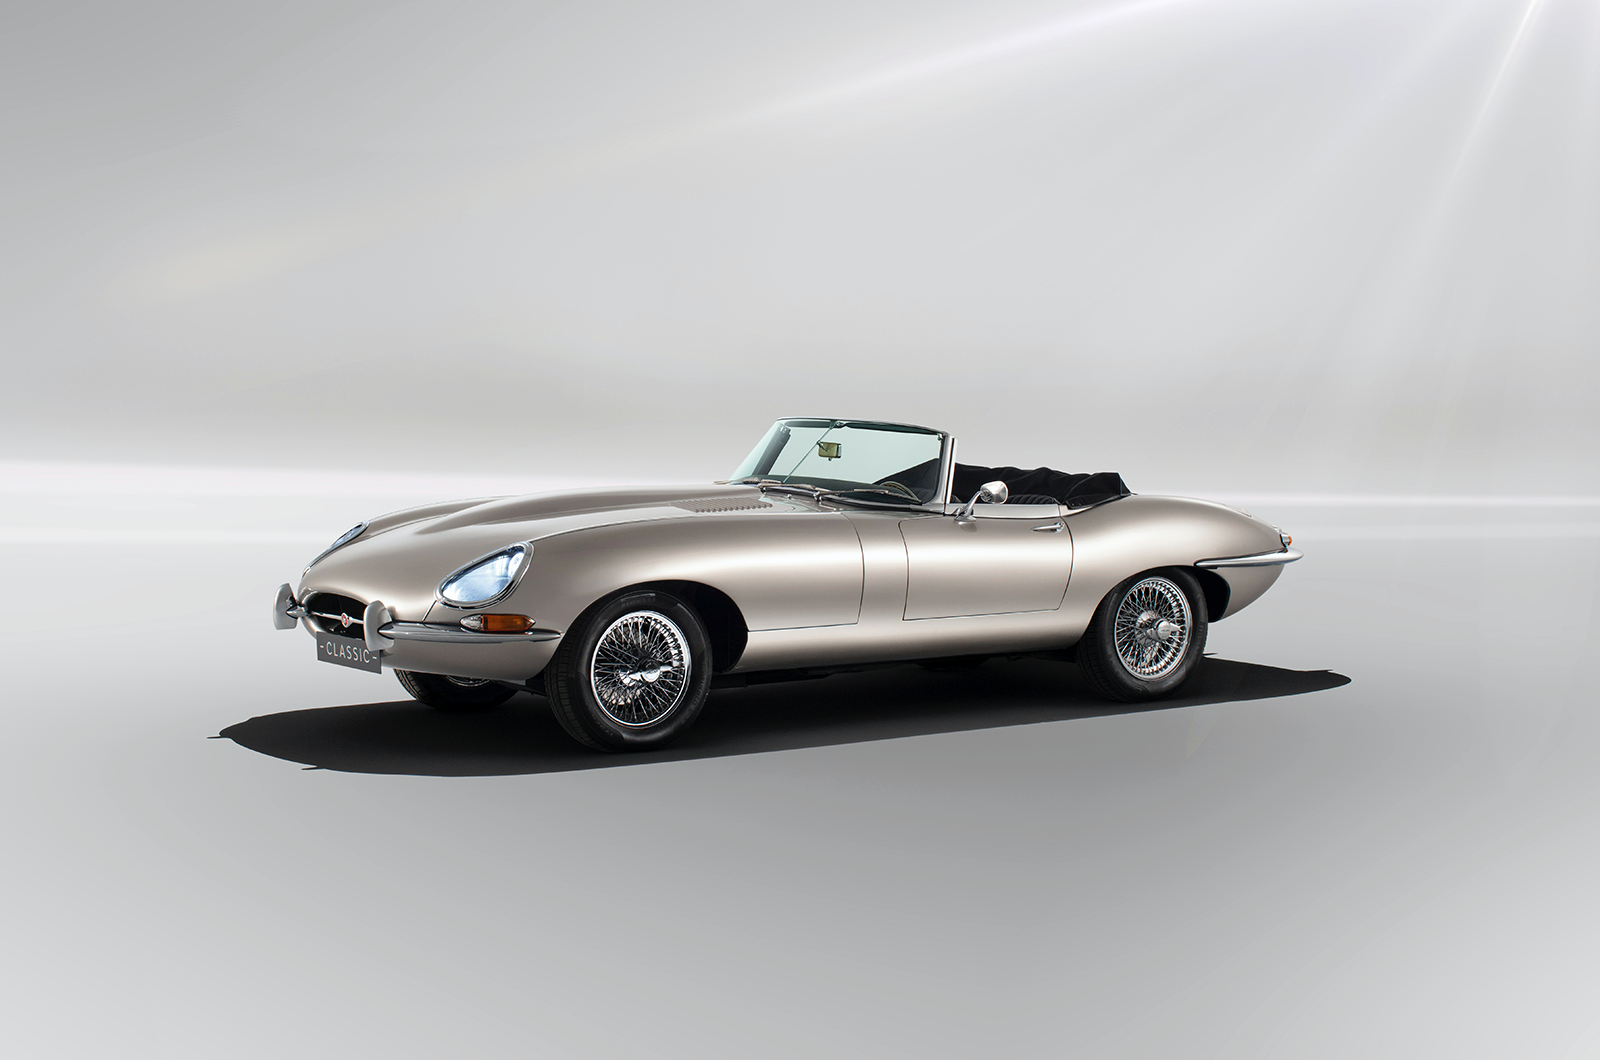 Classic & Sports Car – If you’re electric, you’re not a classic says FIVA